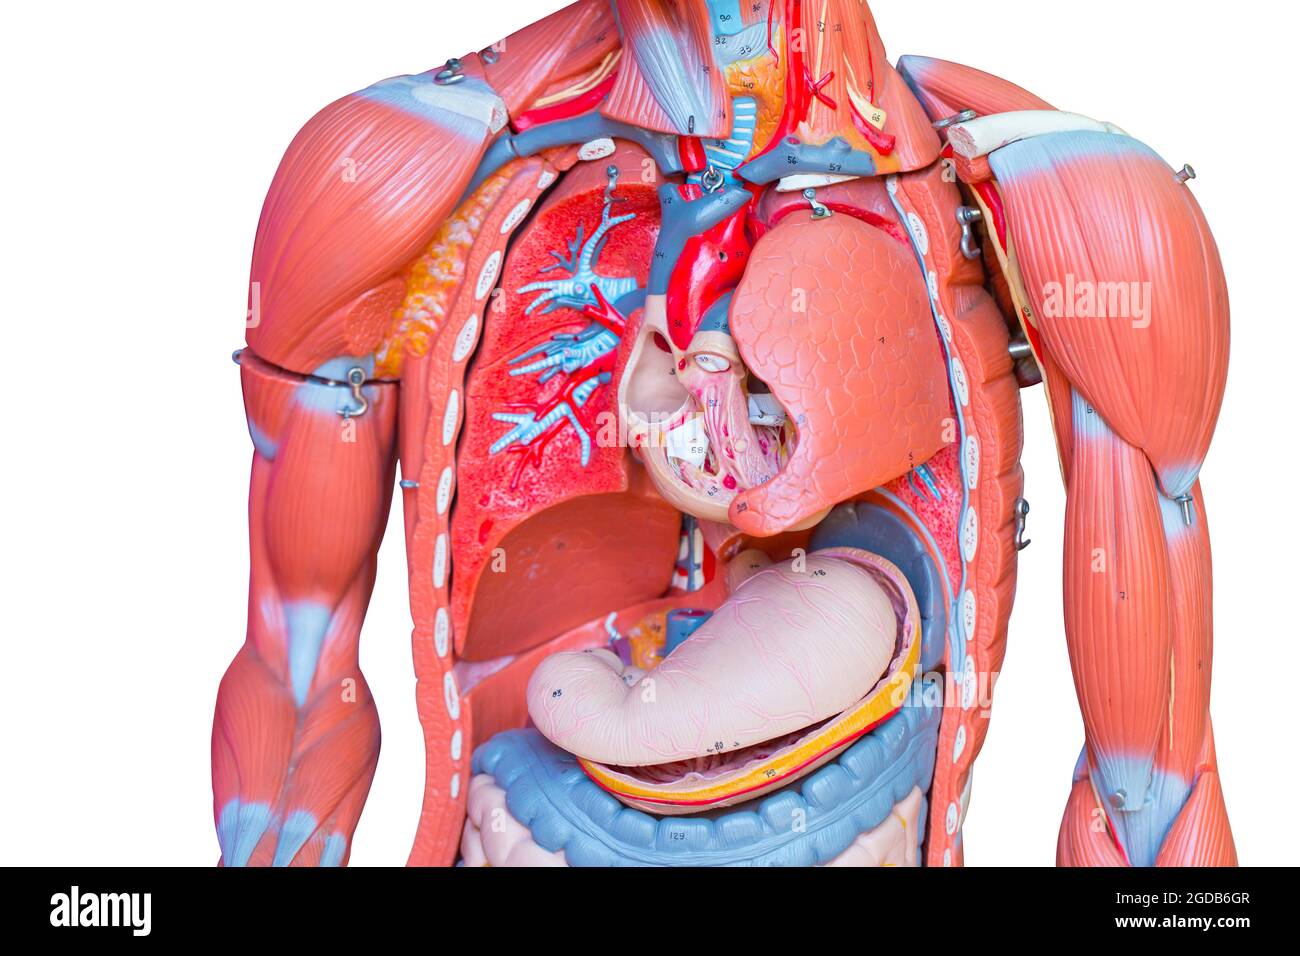 Upper body, Human male chest internal organs lung heart and stomach part model figure for medical education. Stock Photo